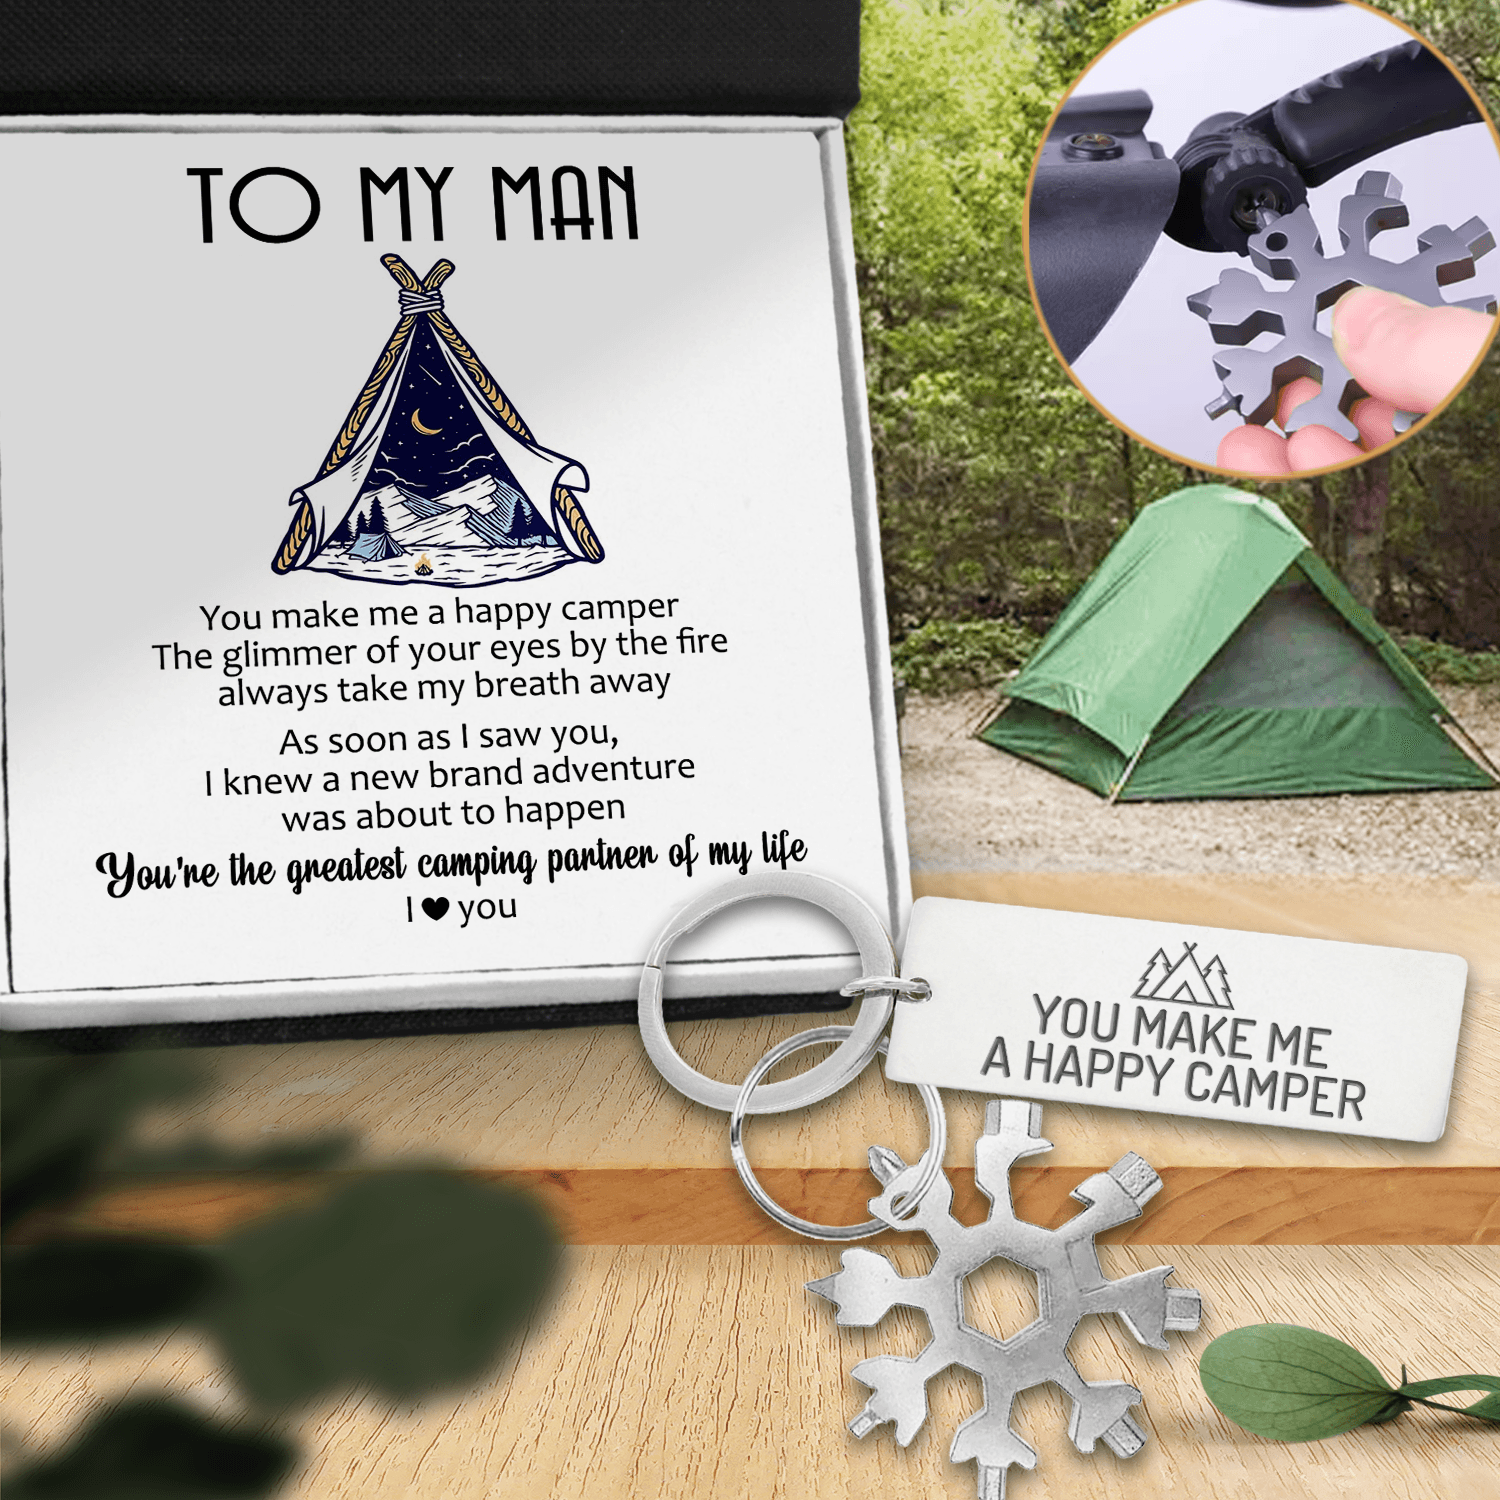 Outdoor Multitool Keychain - Camping - To My Man - You Make Me A Happy Camper - Augktb26011 - Gifts Holder